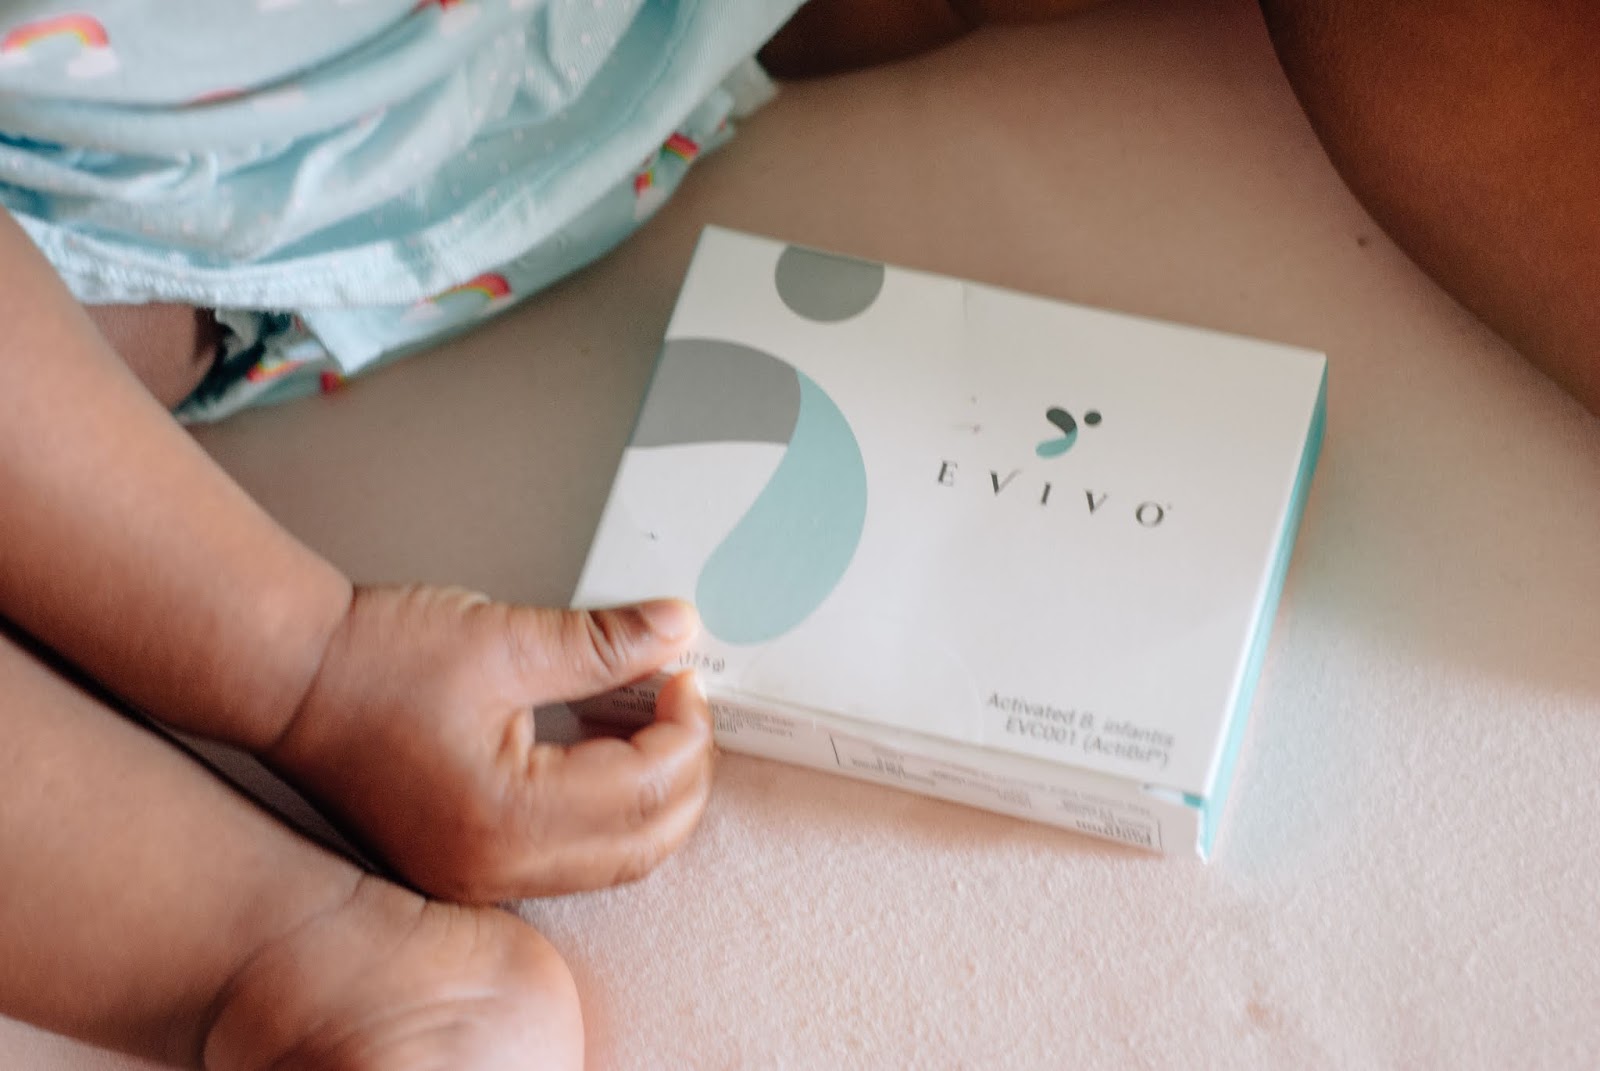 It's been a while since our last chat about  Evivo. We didn't get a chance to fully reap the benefits of our first box of Evivo probiotics thanks to our fridge quitting on us. I'm so glad we were able get a second chance at improving her gut health. As I mentioned in my previous Evivo post the first 6 months of a baby's life are critical for immune and metabolic development.  Even though McKenna just turned 1 we're still using Evivo to help get rid of her eczema and reduce the bad bacteria in her gut. #Evivo #SmartAsAMother @EvivoHealth #AD